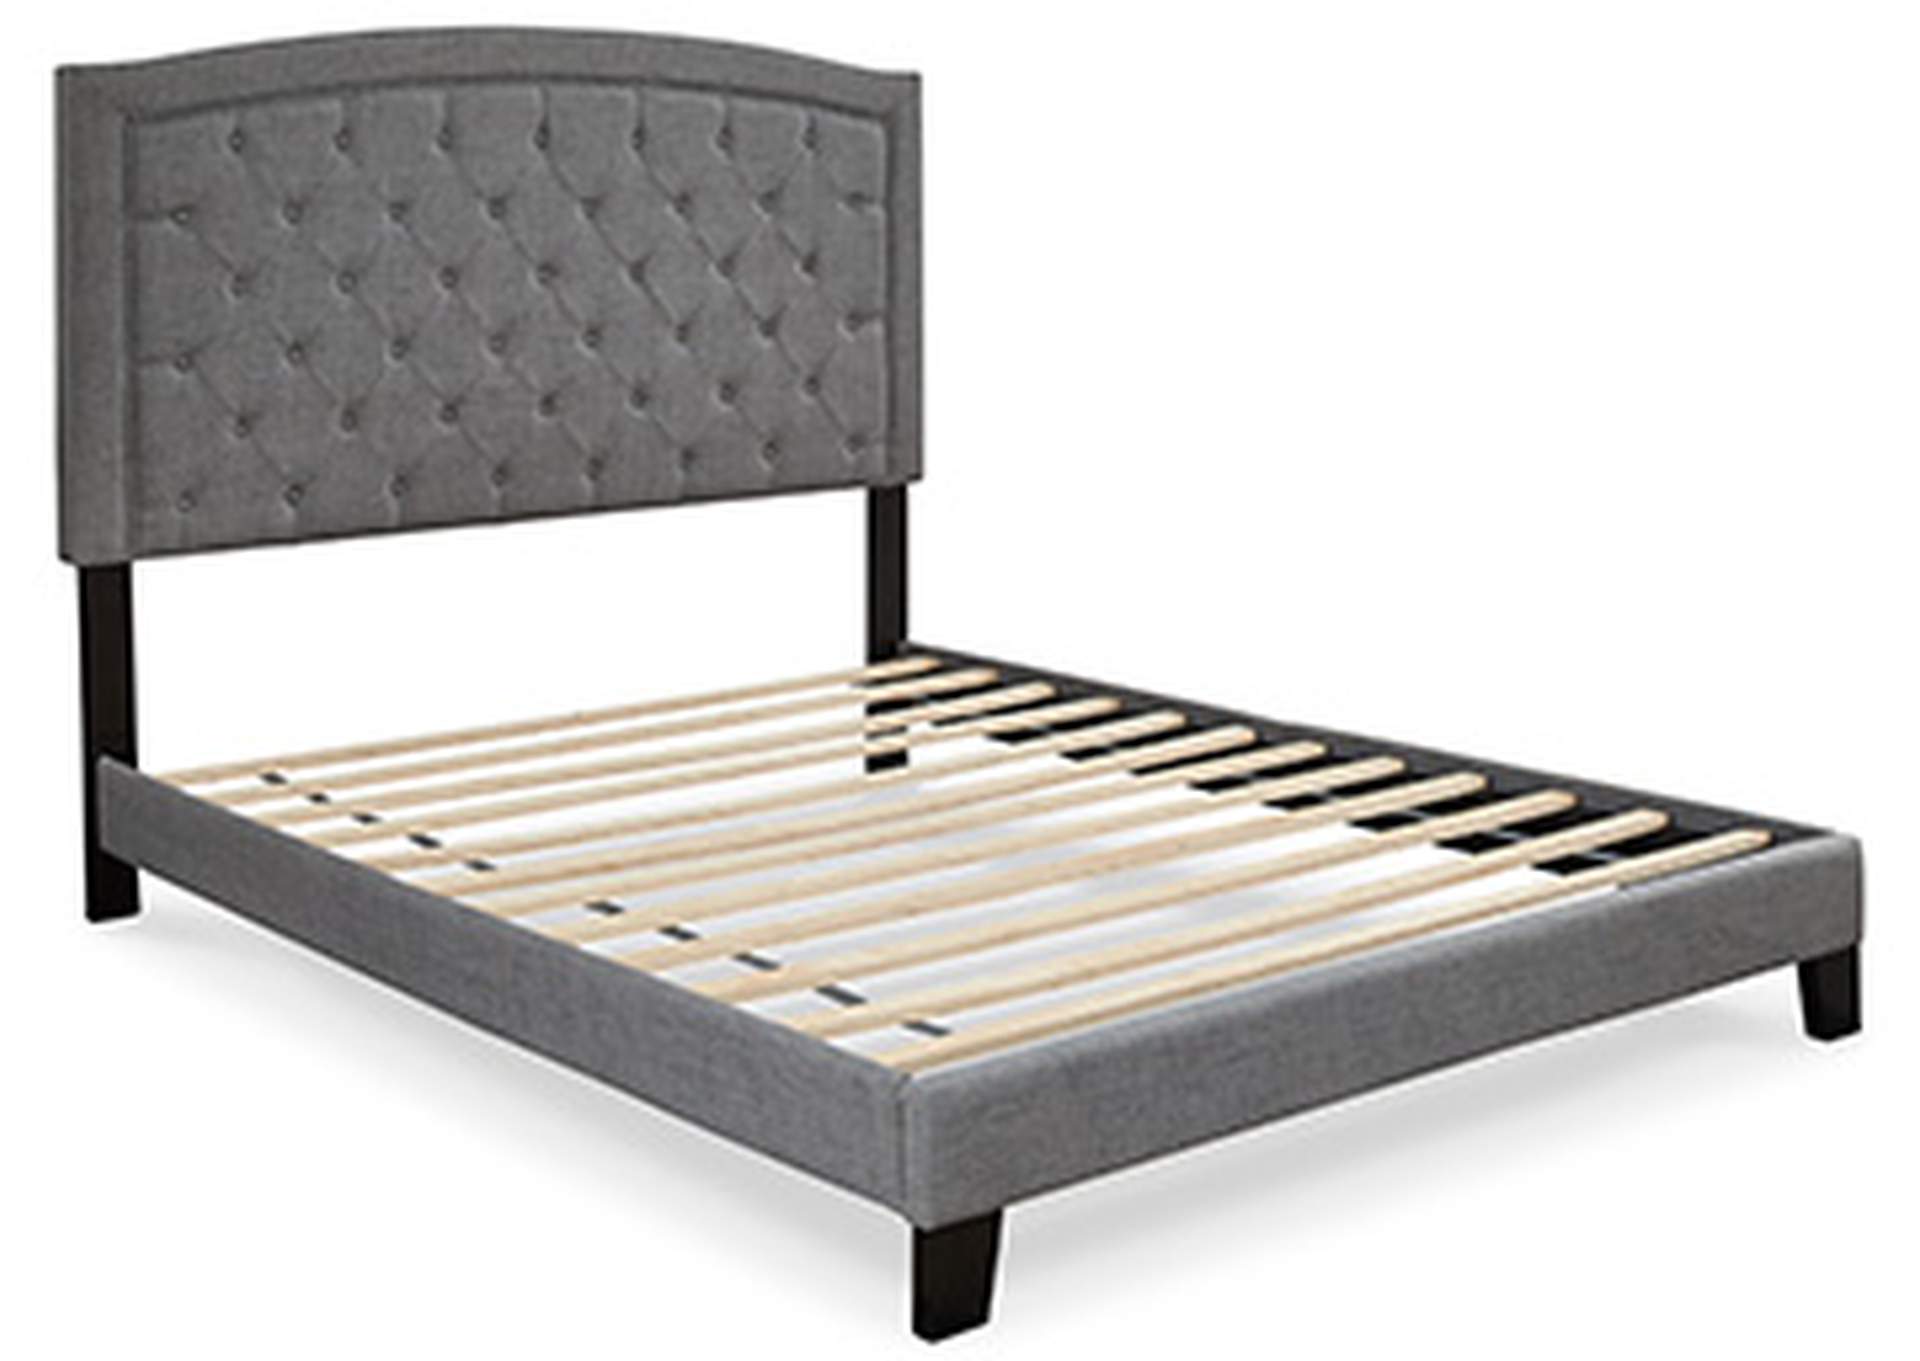 Adelloni Queen Upholstered Bed,Signature Design By Ashley